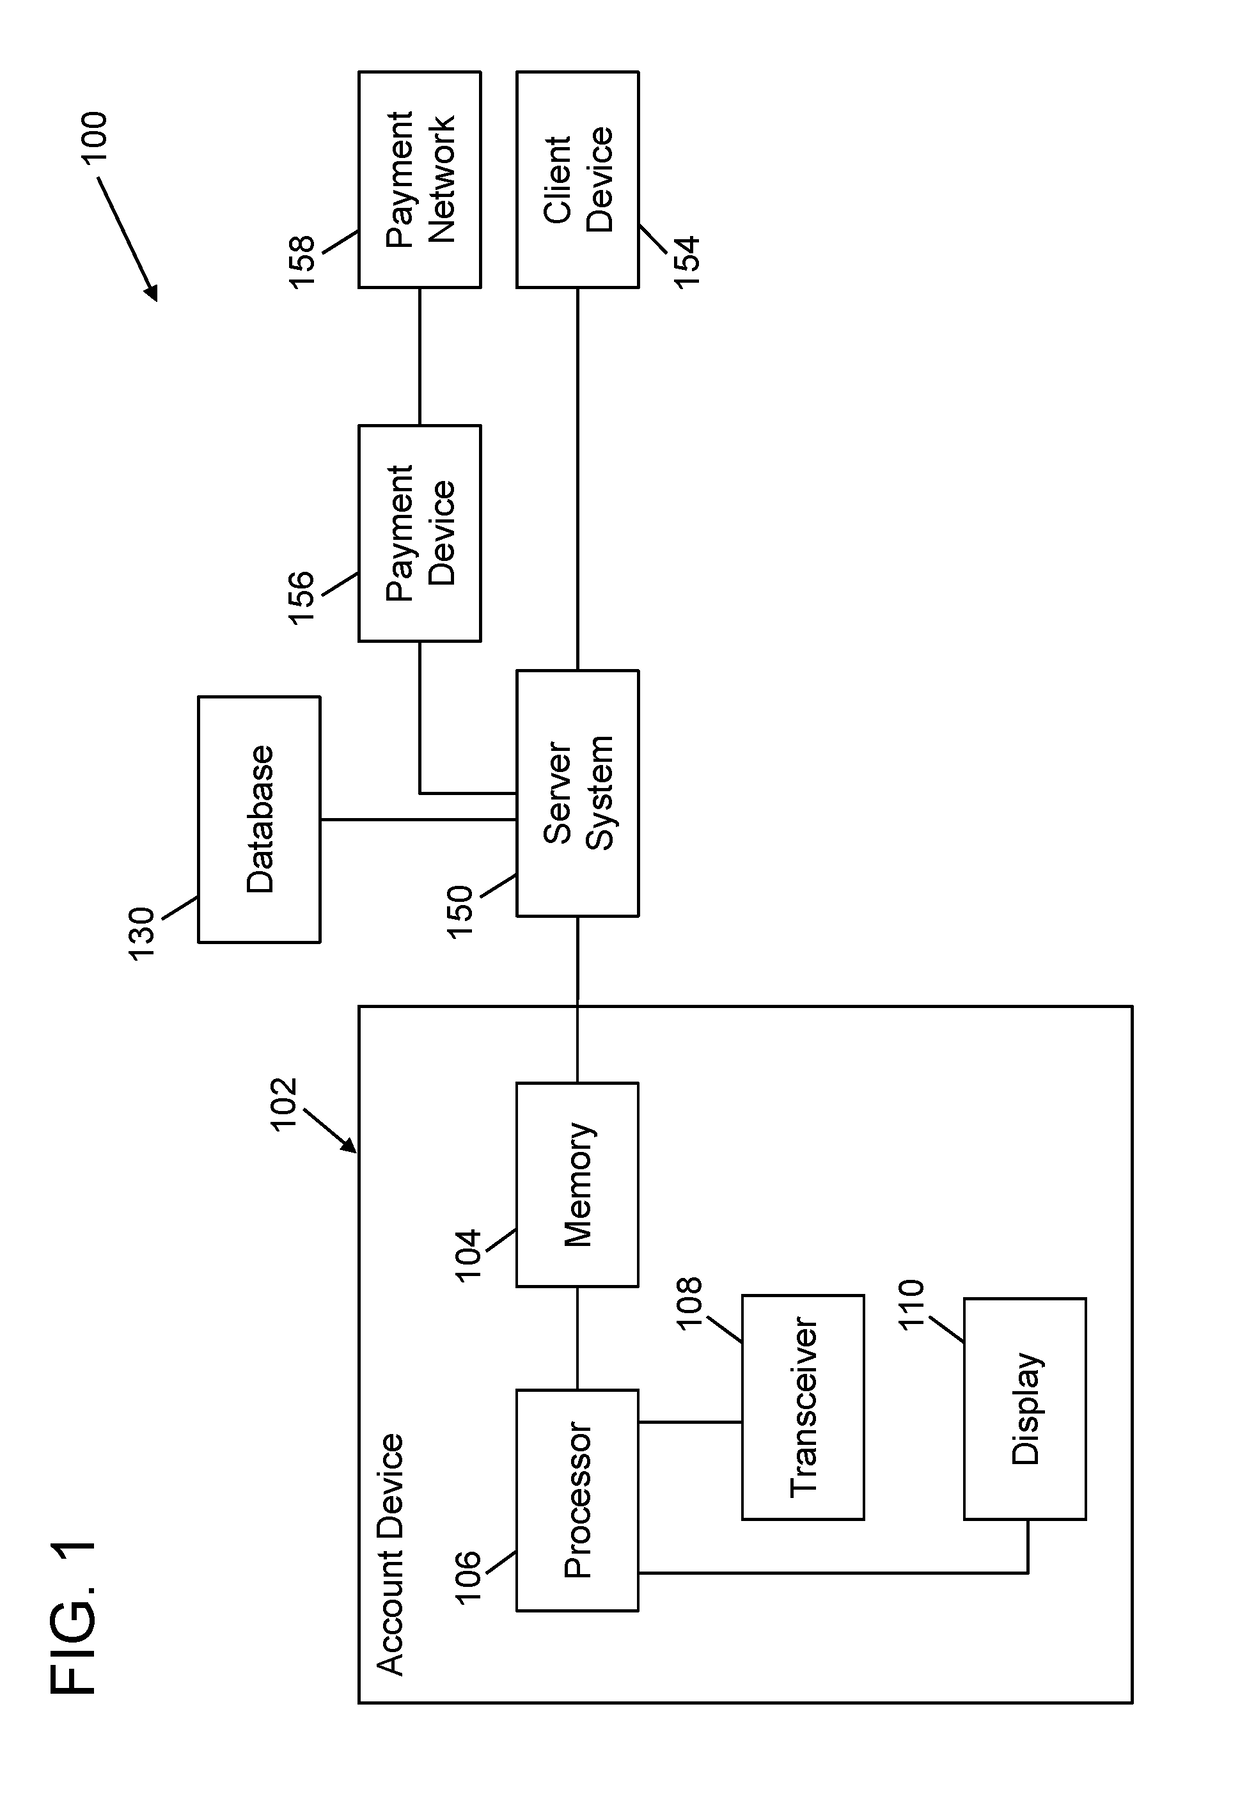 Electronic payment card systems and methods with rogue authorization charge identification and resolution